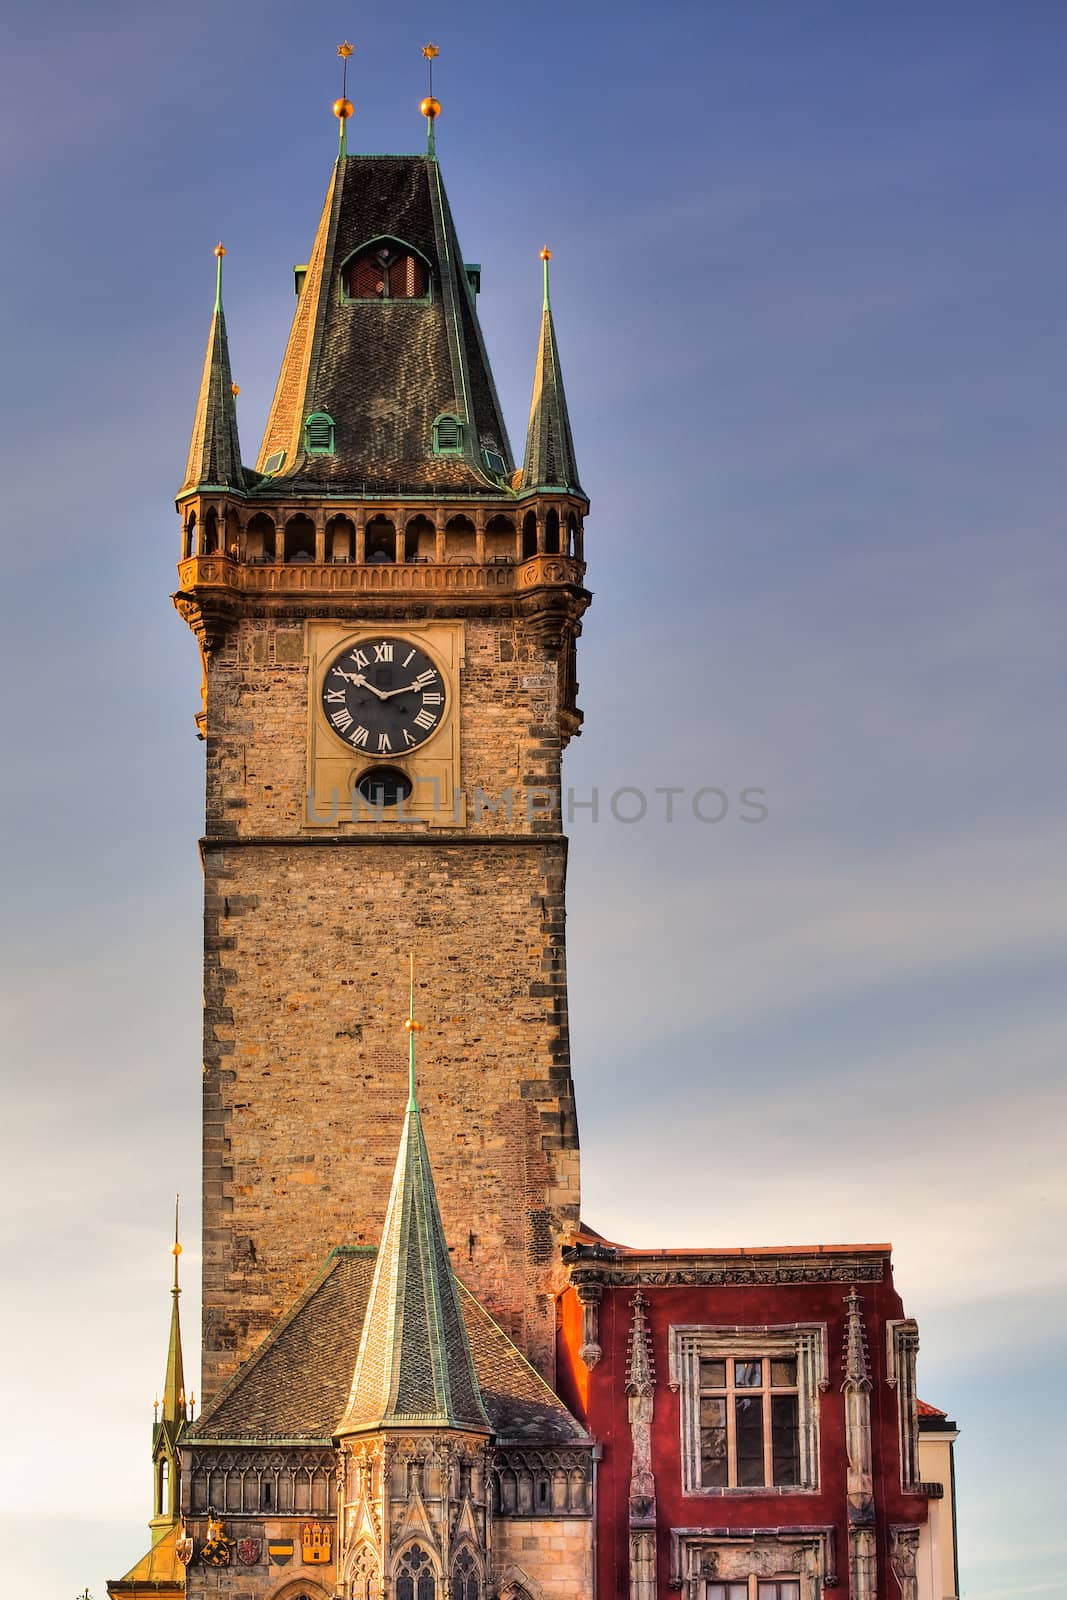 City hall at the Old Town Square, Prague, Czech Republic